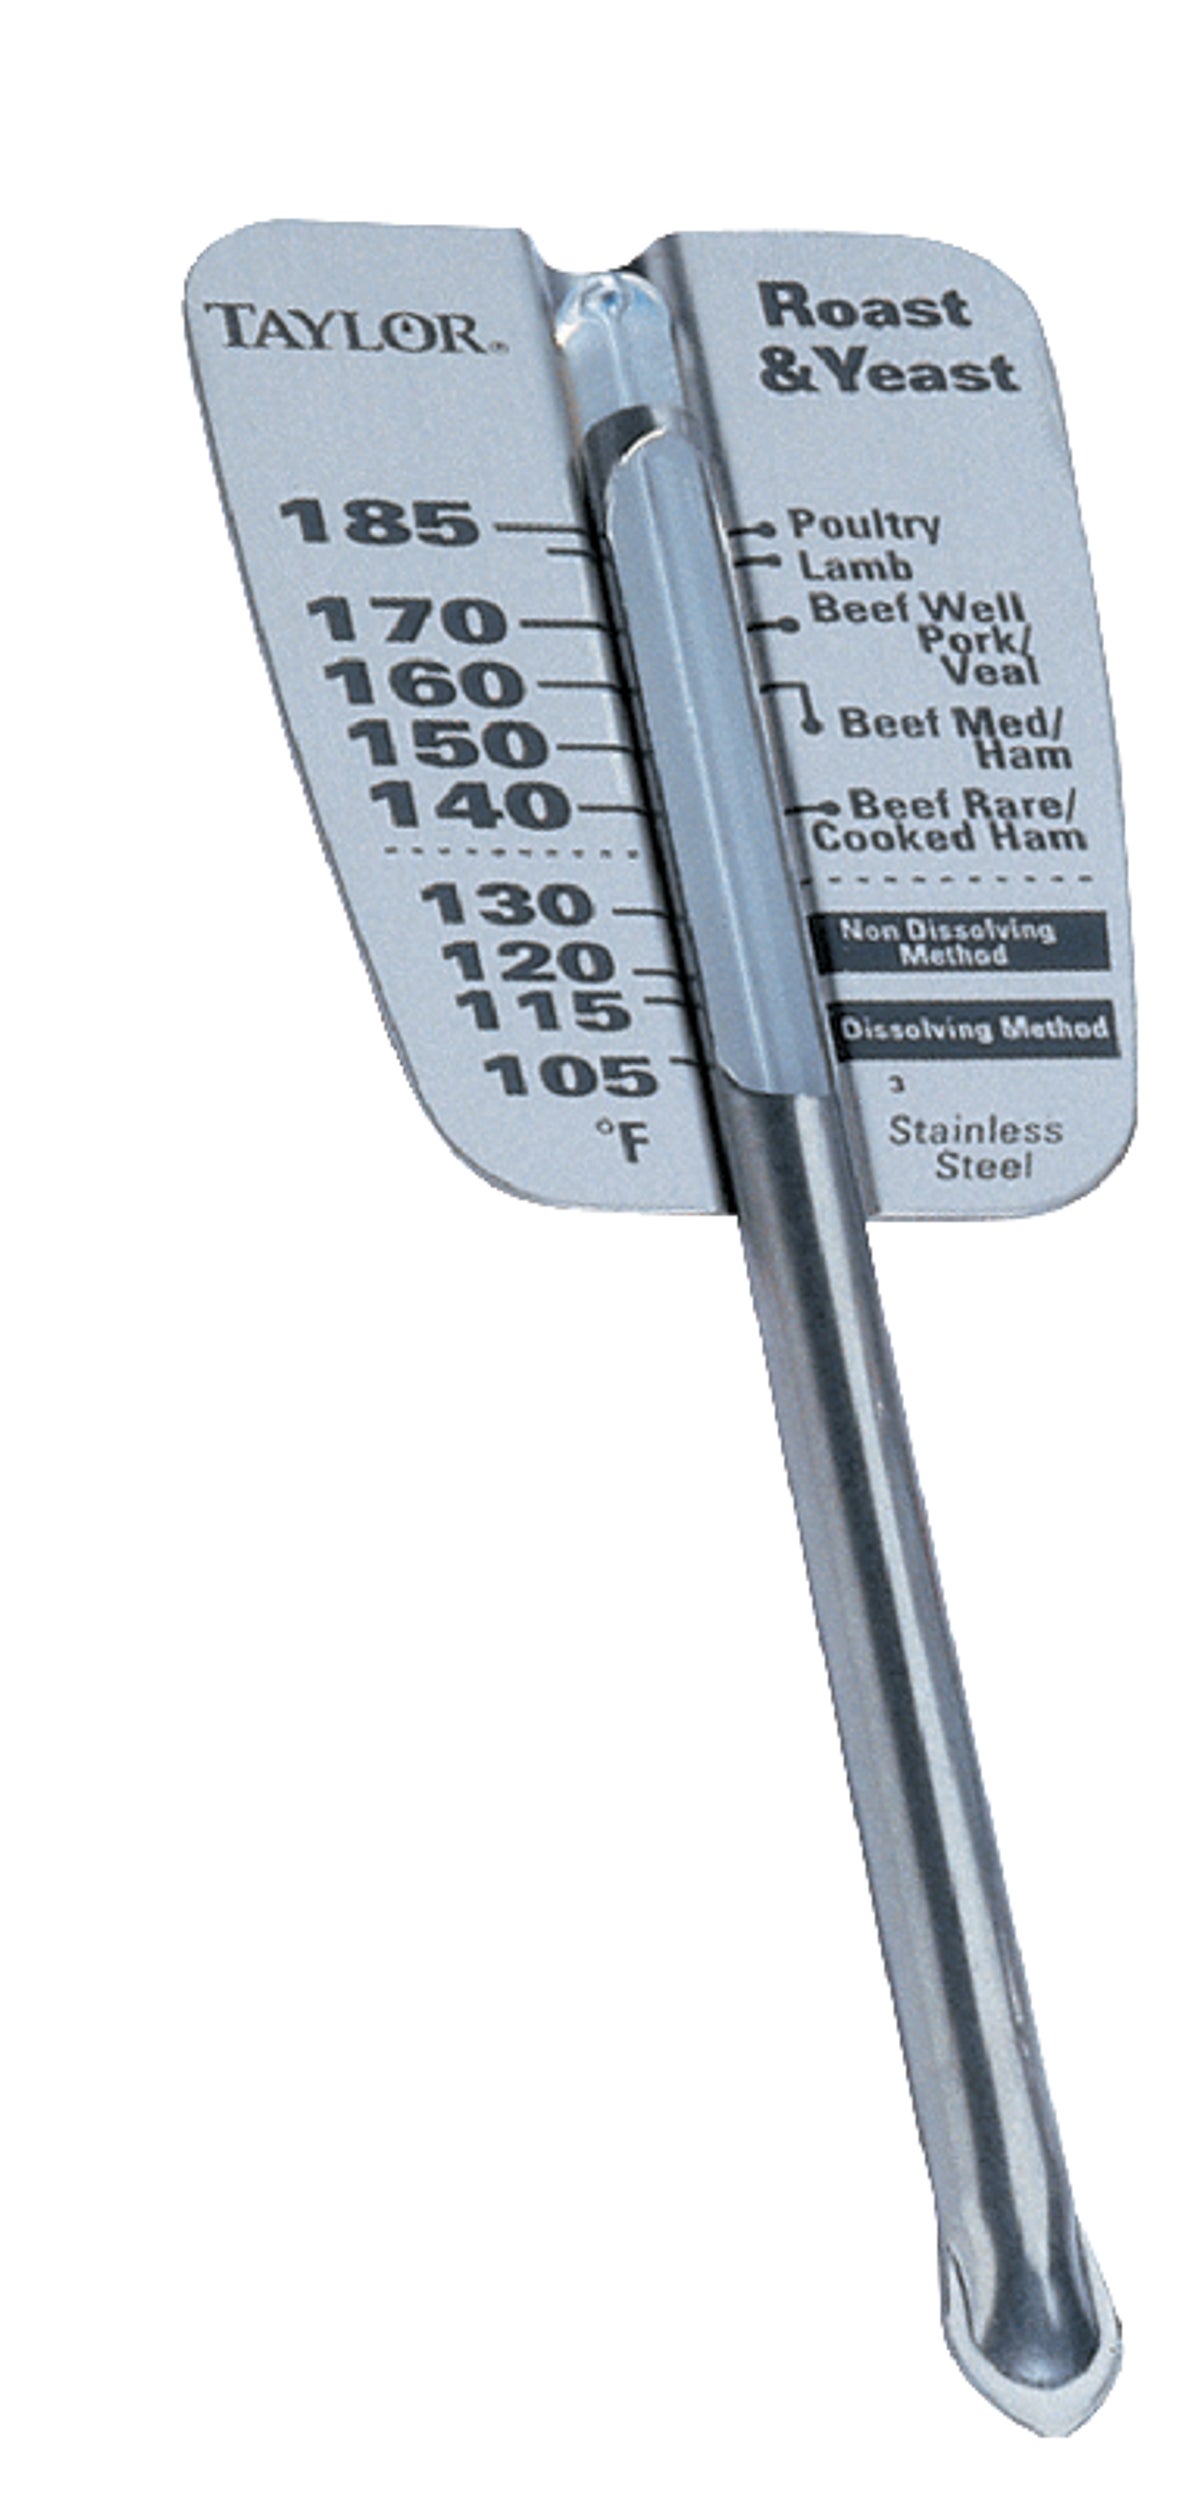 Goodcook Precision Candy/Fry Thermometer 25115, 11.7In.L